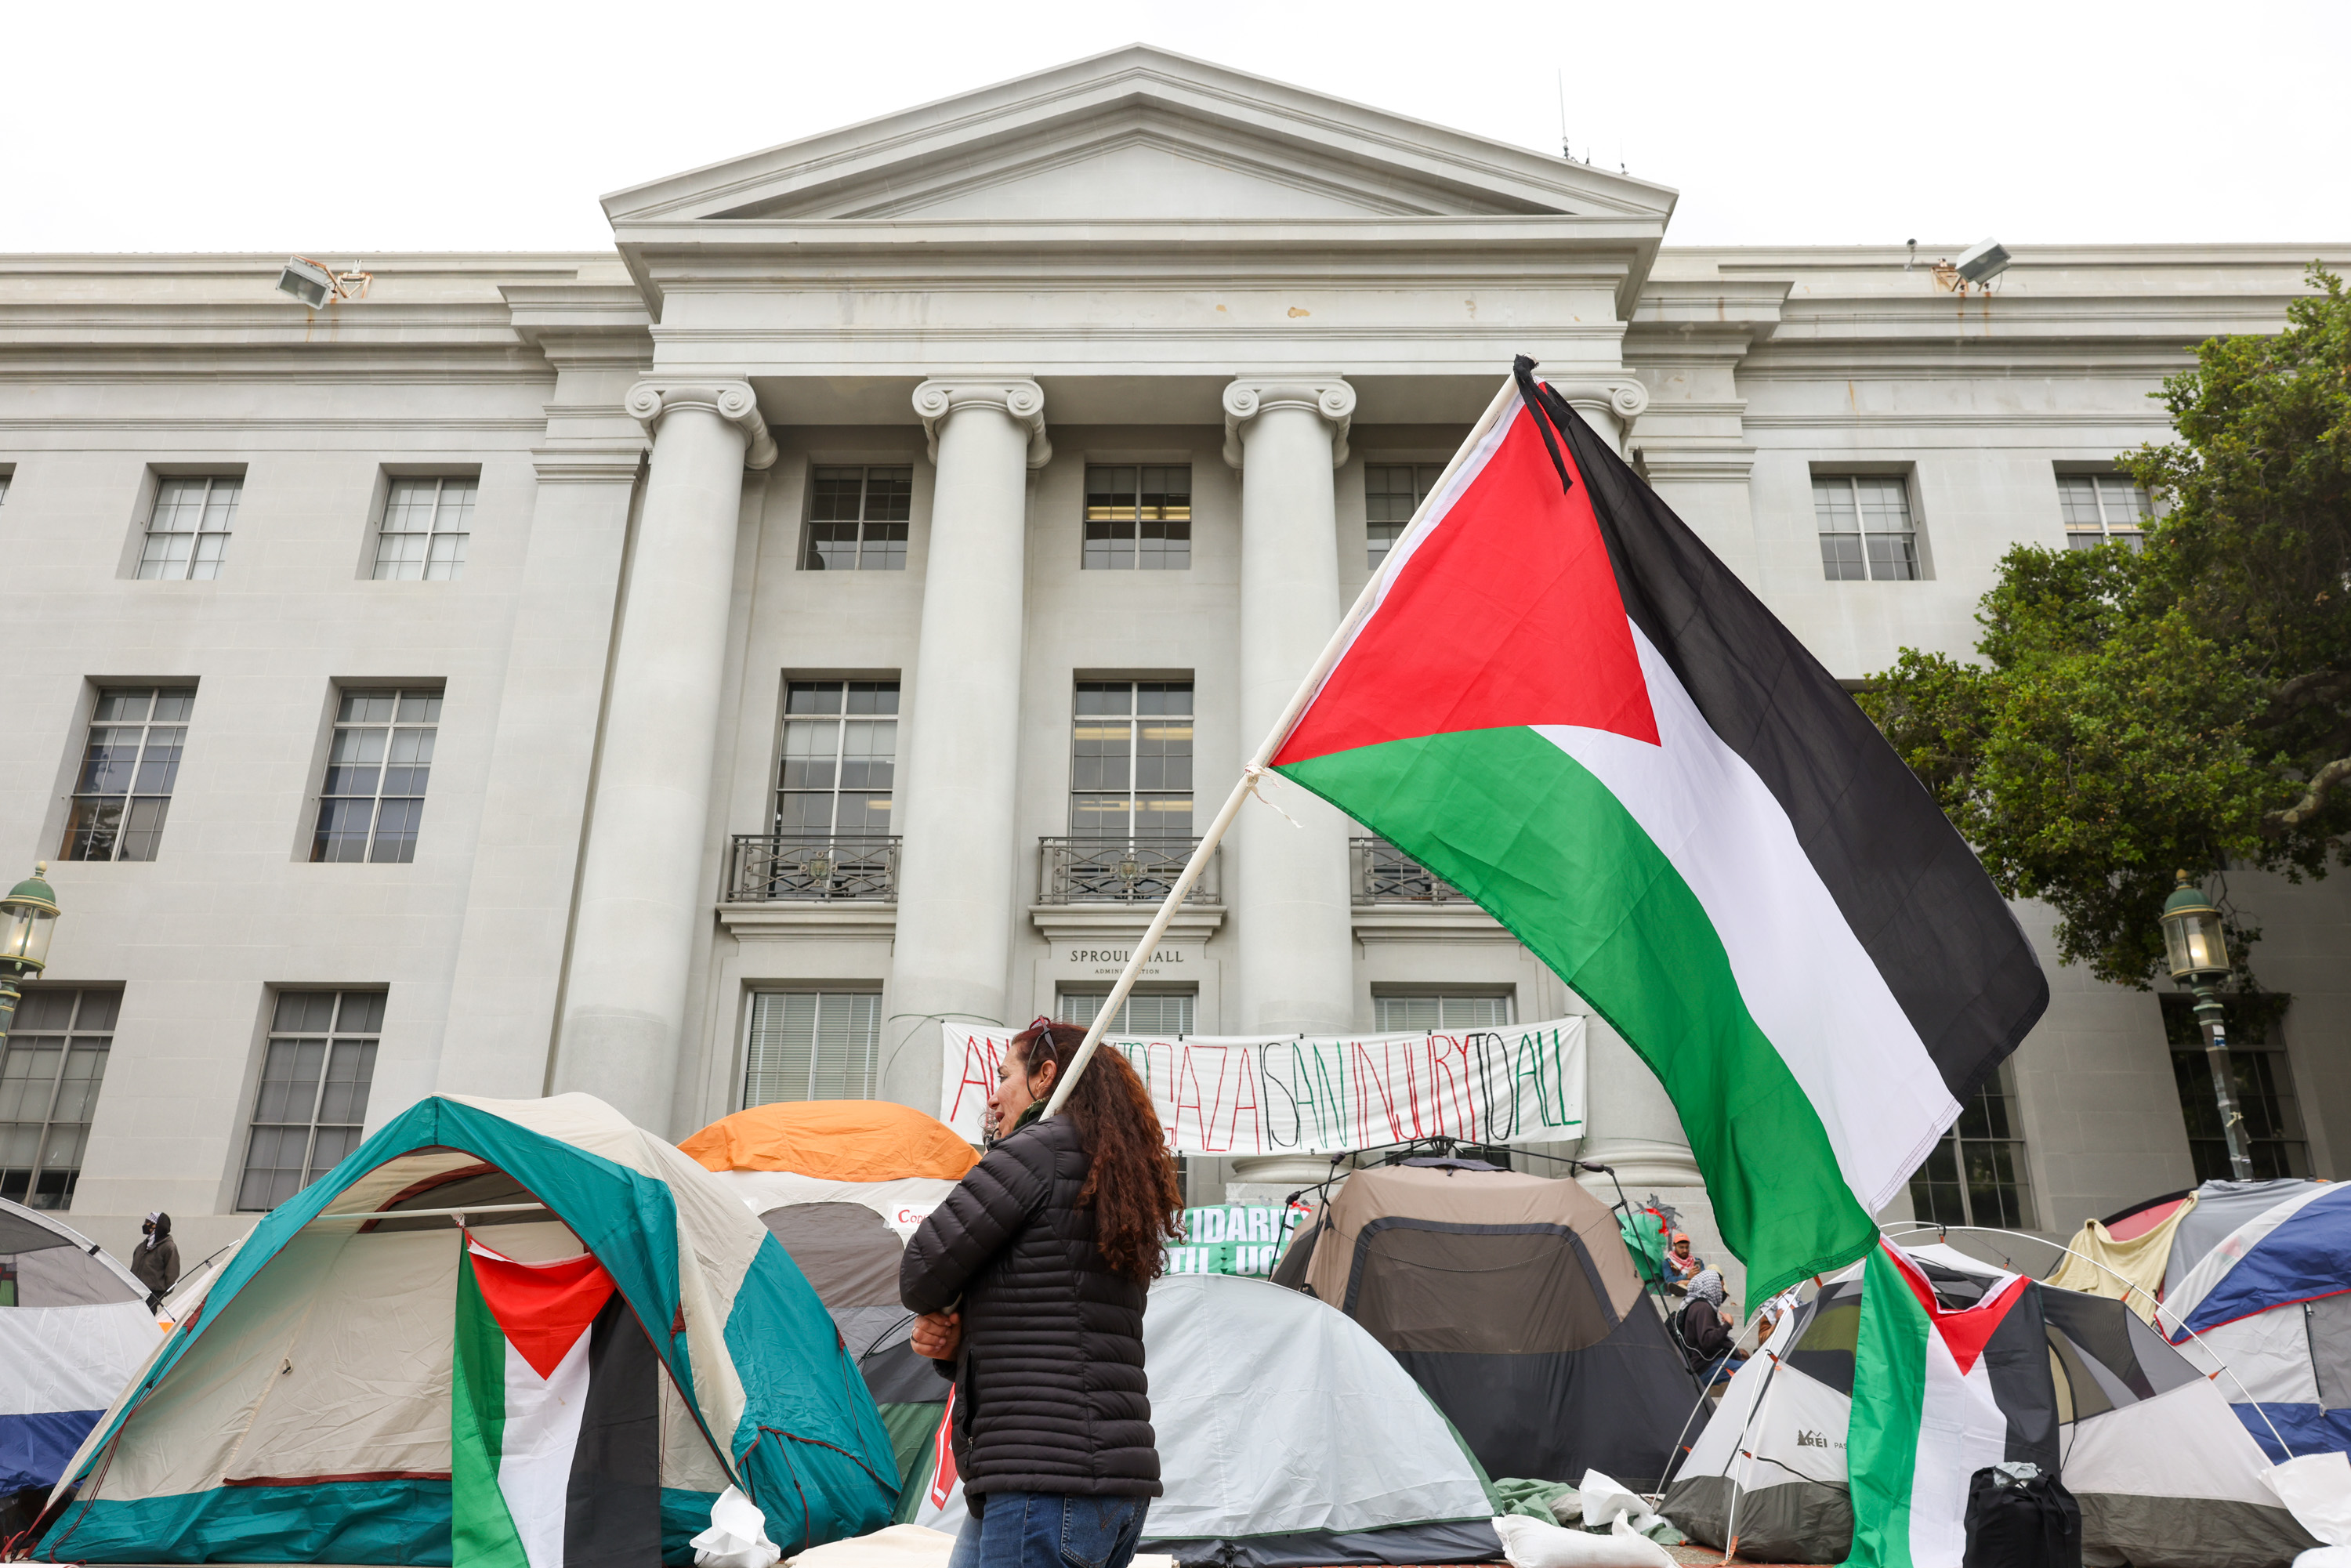 A person waves a large Palestinian flag in front of a building with tents and protest banners.